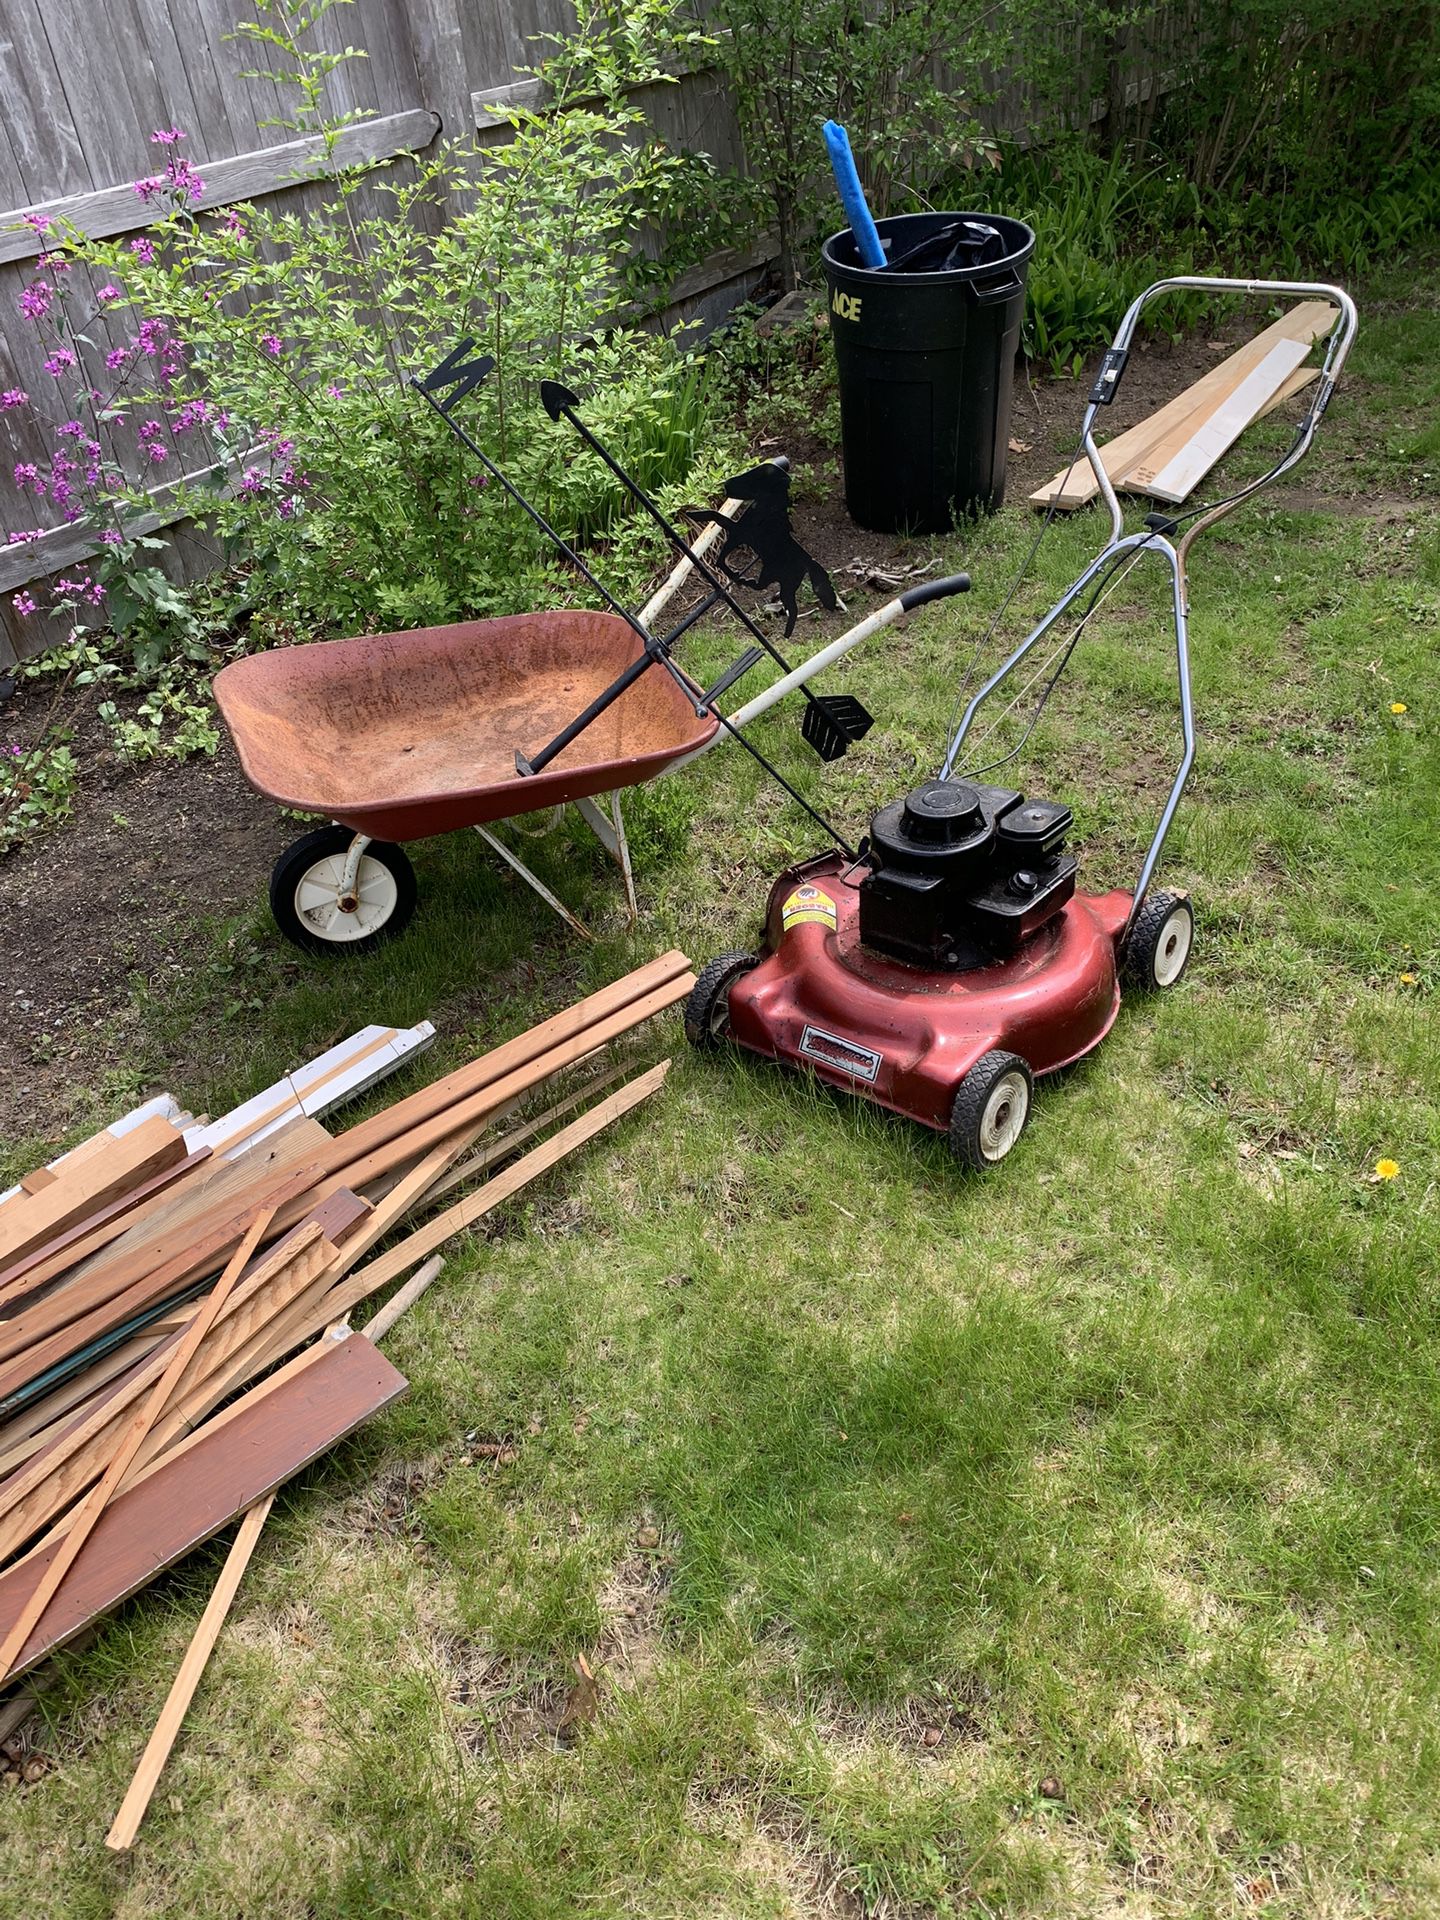 Shed clean out, Rockport MA, All Items Available For pickup- Free